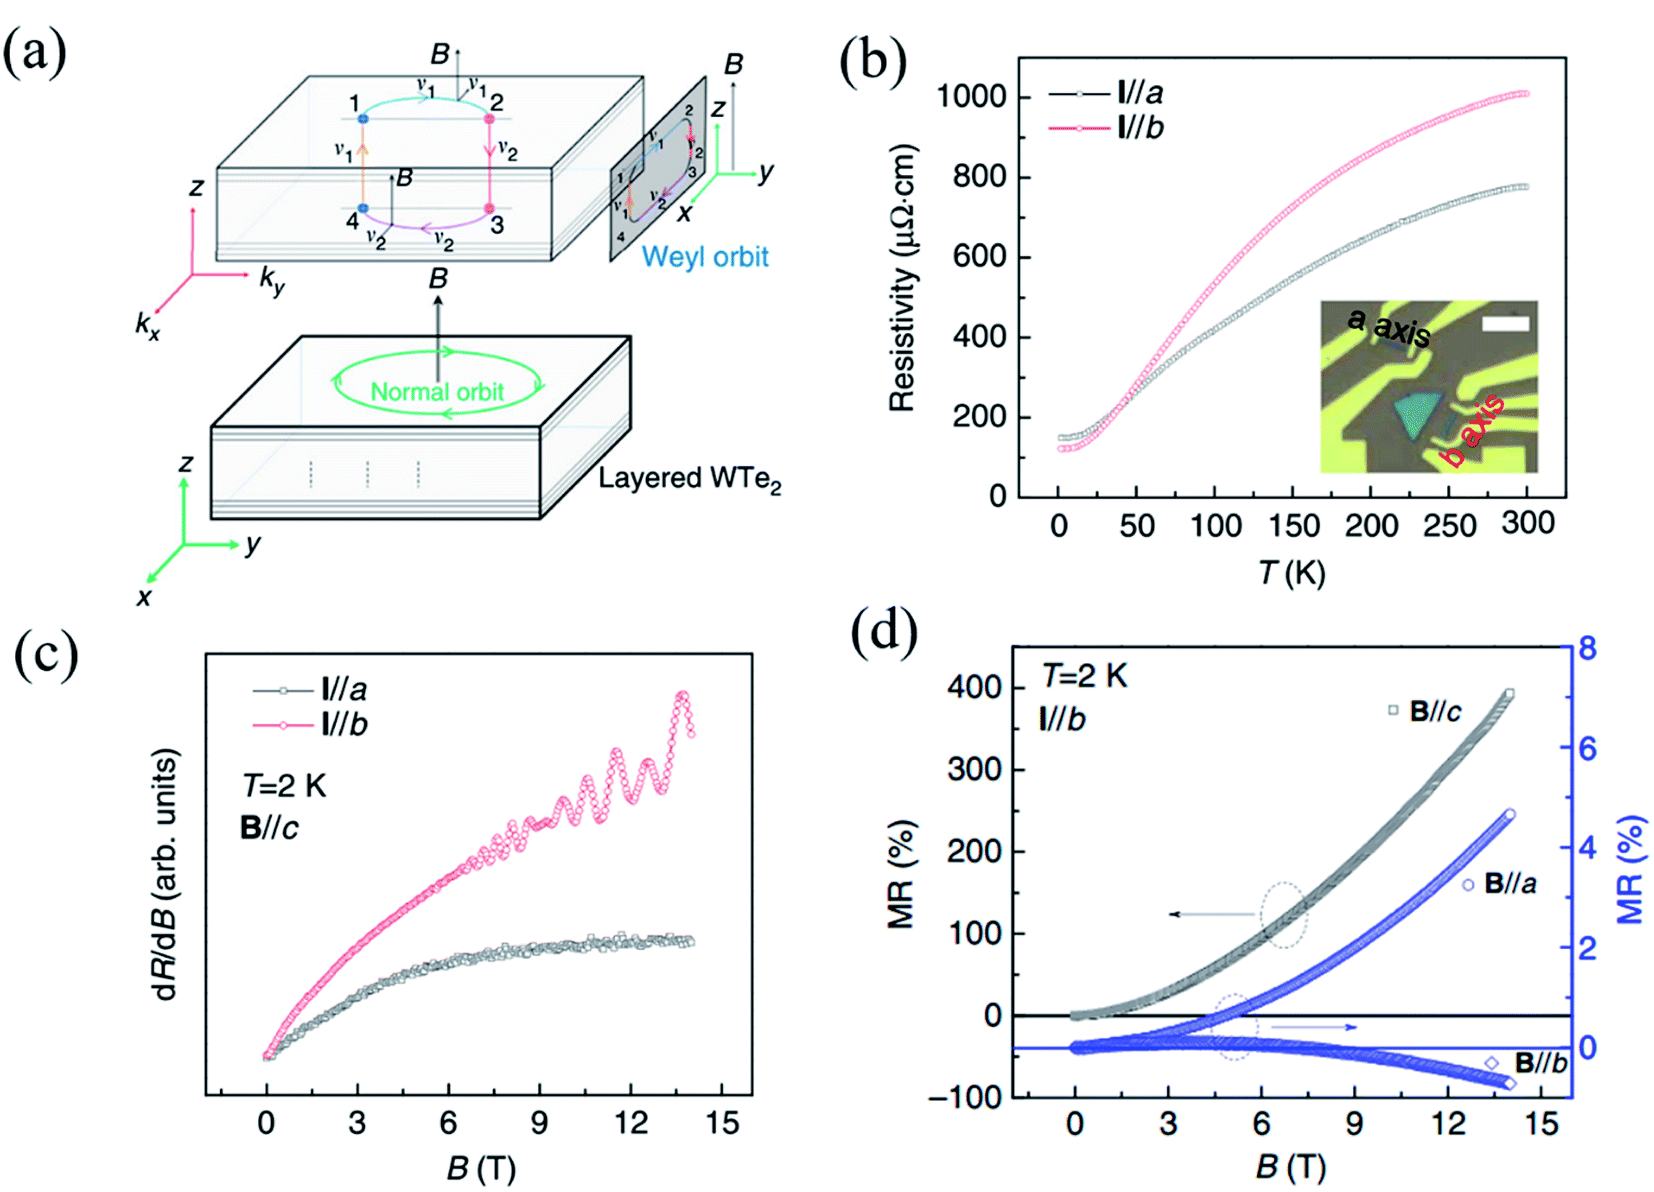 In Plane Anisotropic Electronics Based On Low Symmetry 2d Materials Progress And Prospects Nanoscale Advances Rsc Publishing